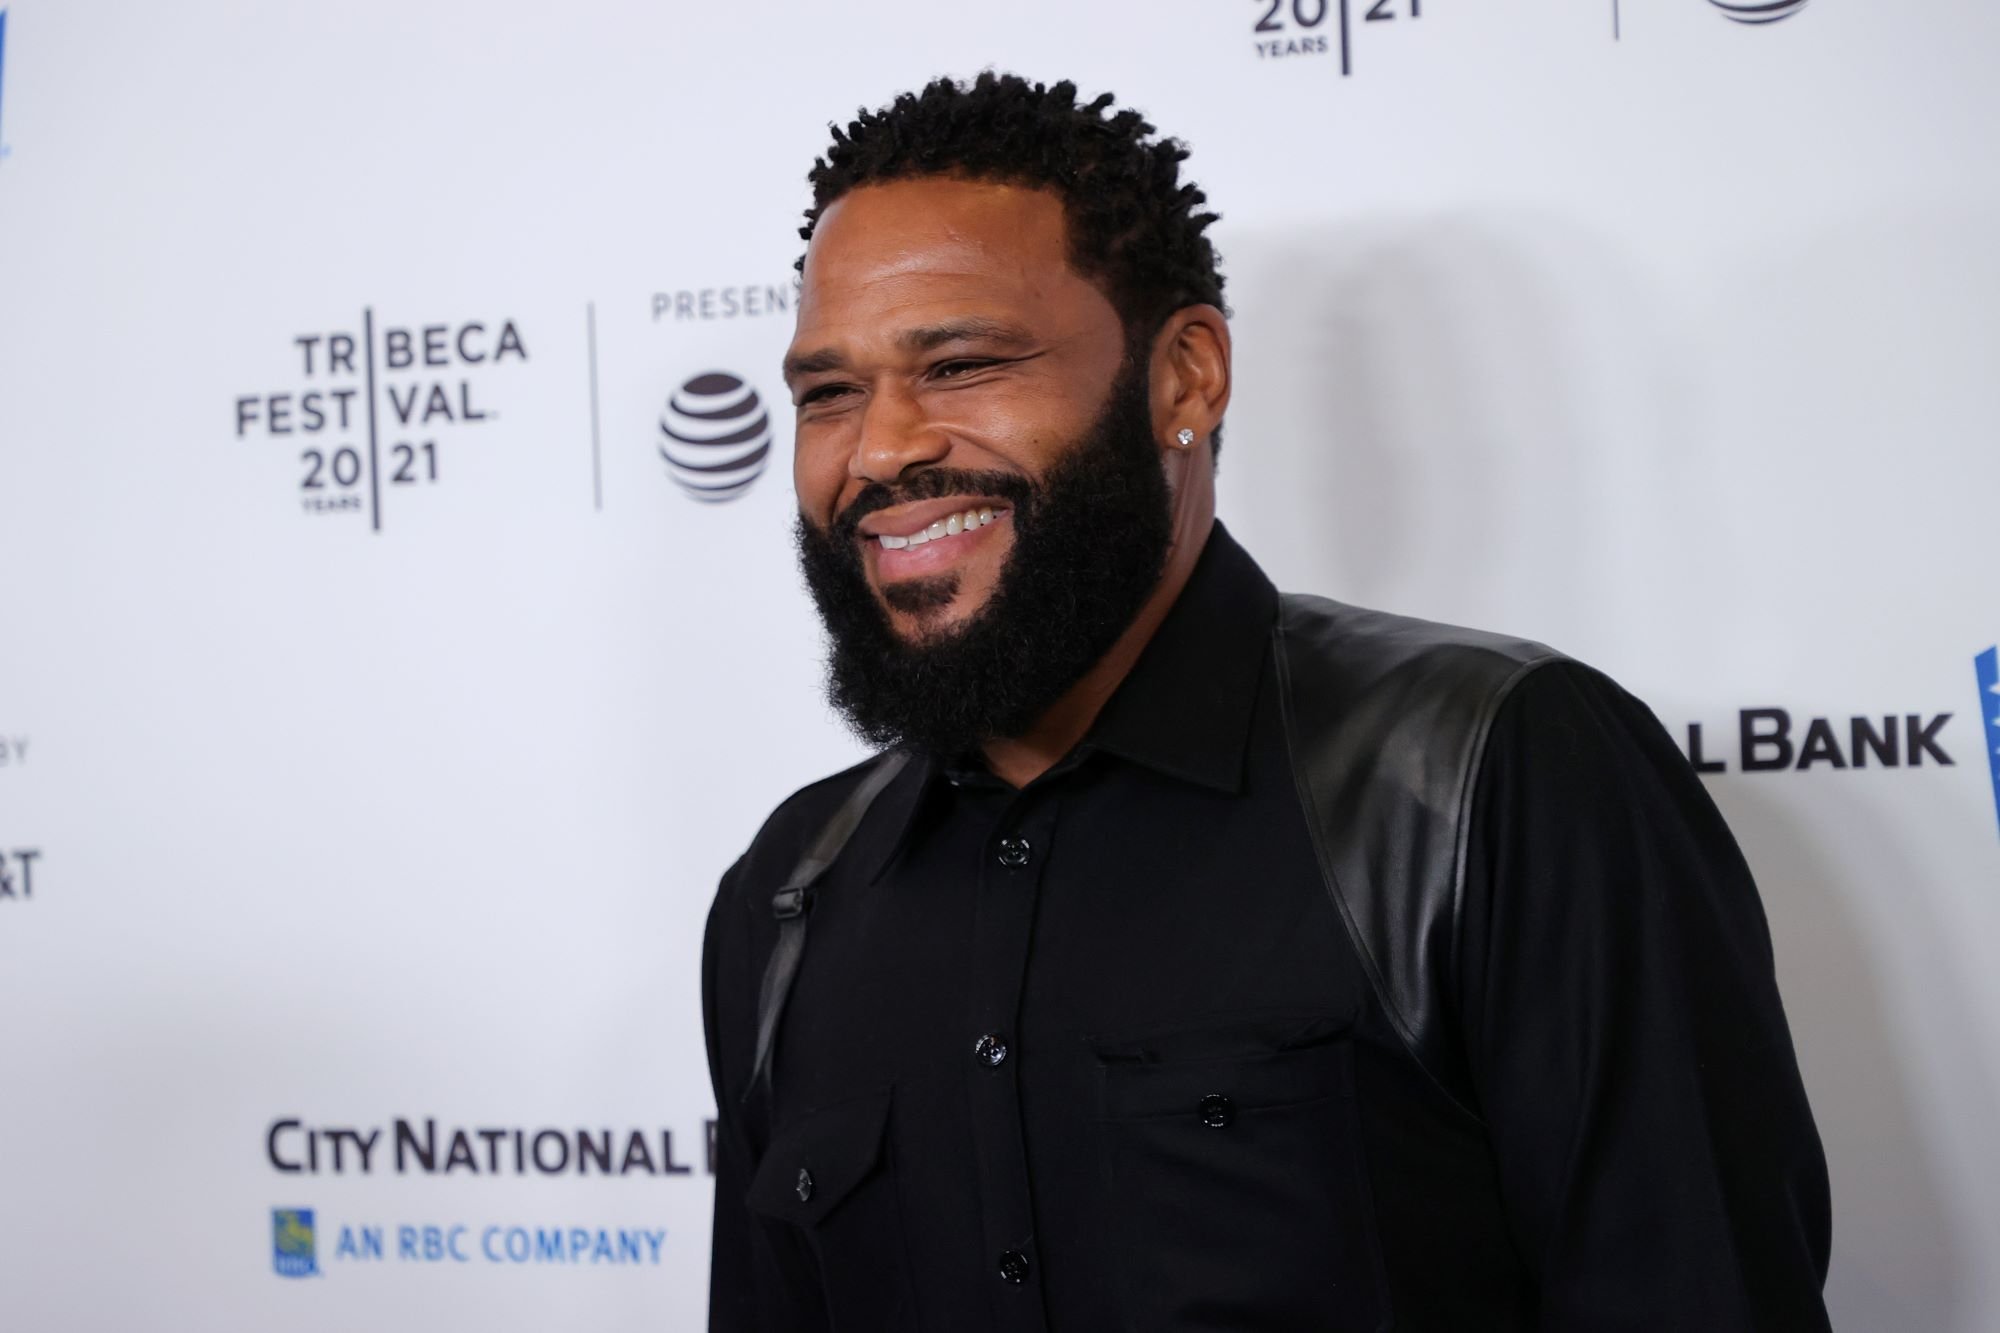 Actor Anthony Anderson attending a premiere at the 2021 Tribeca Festival